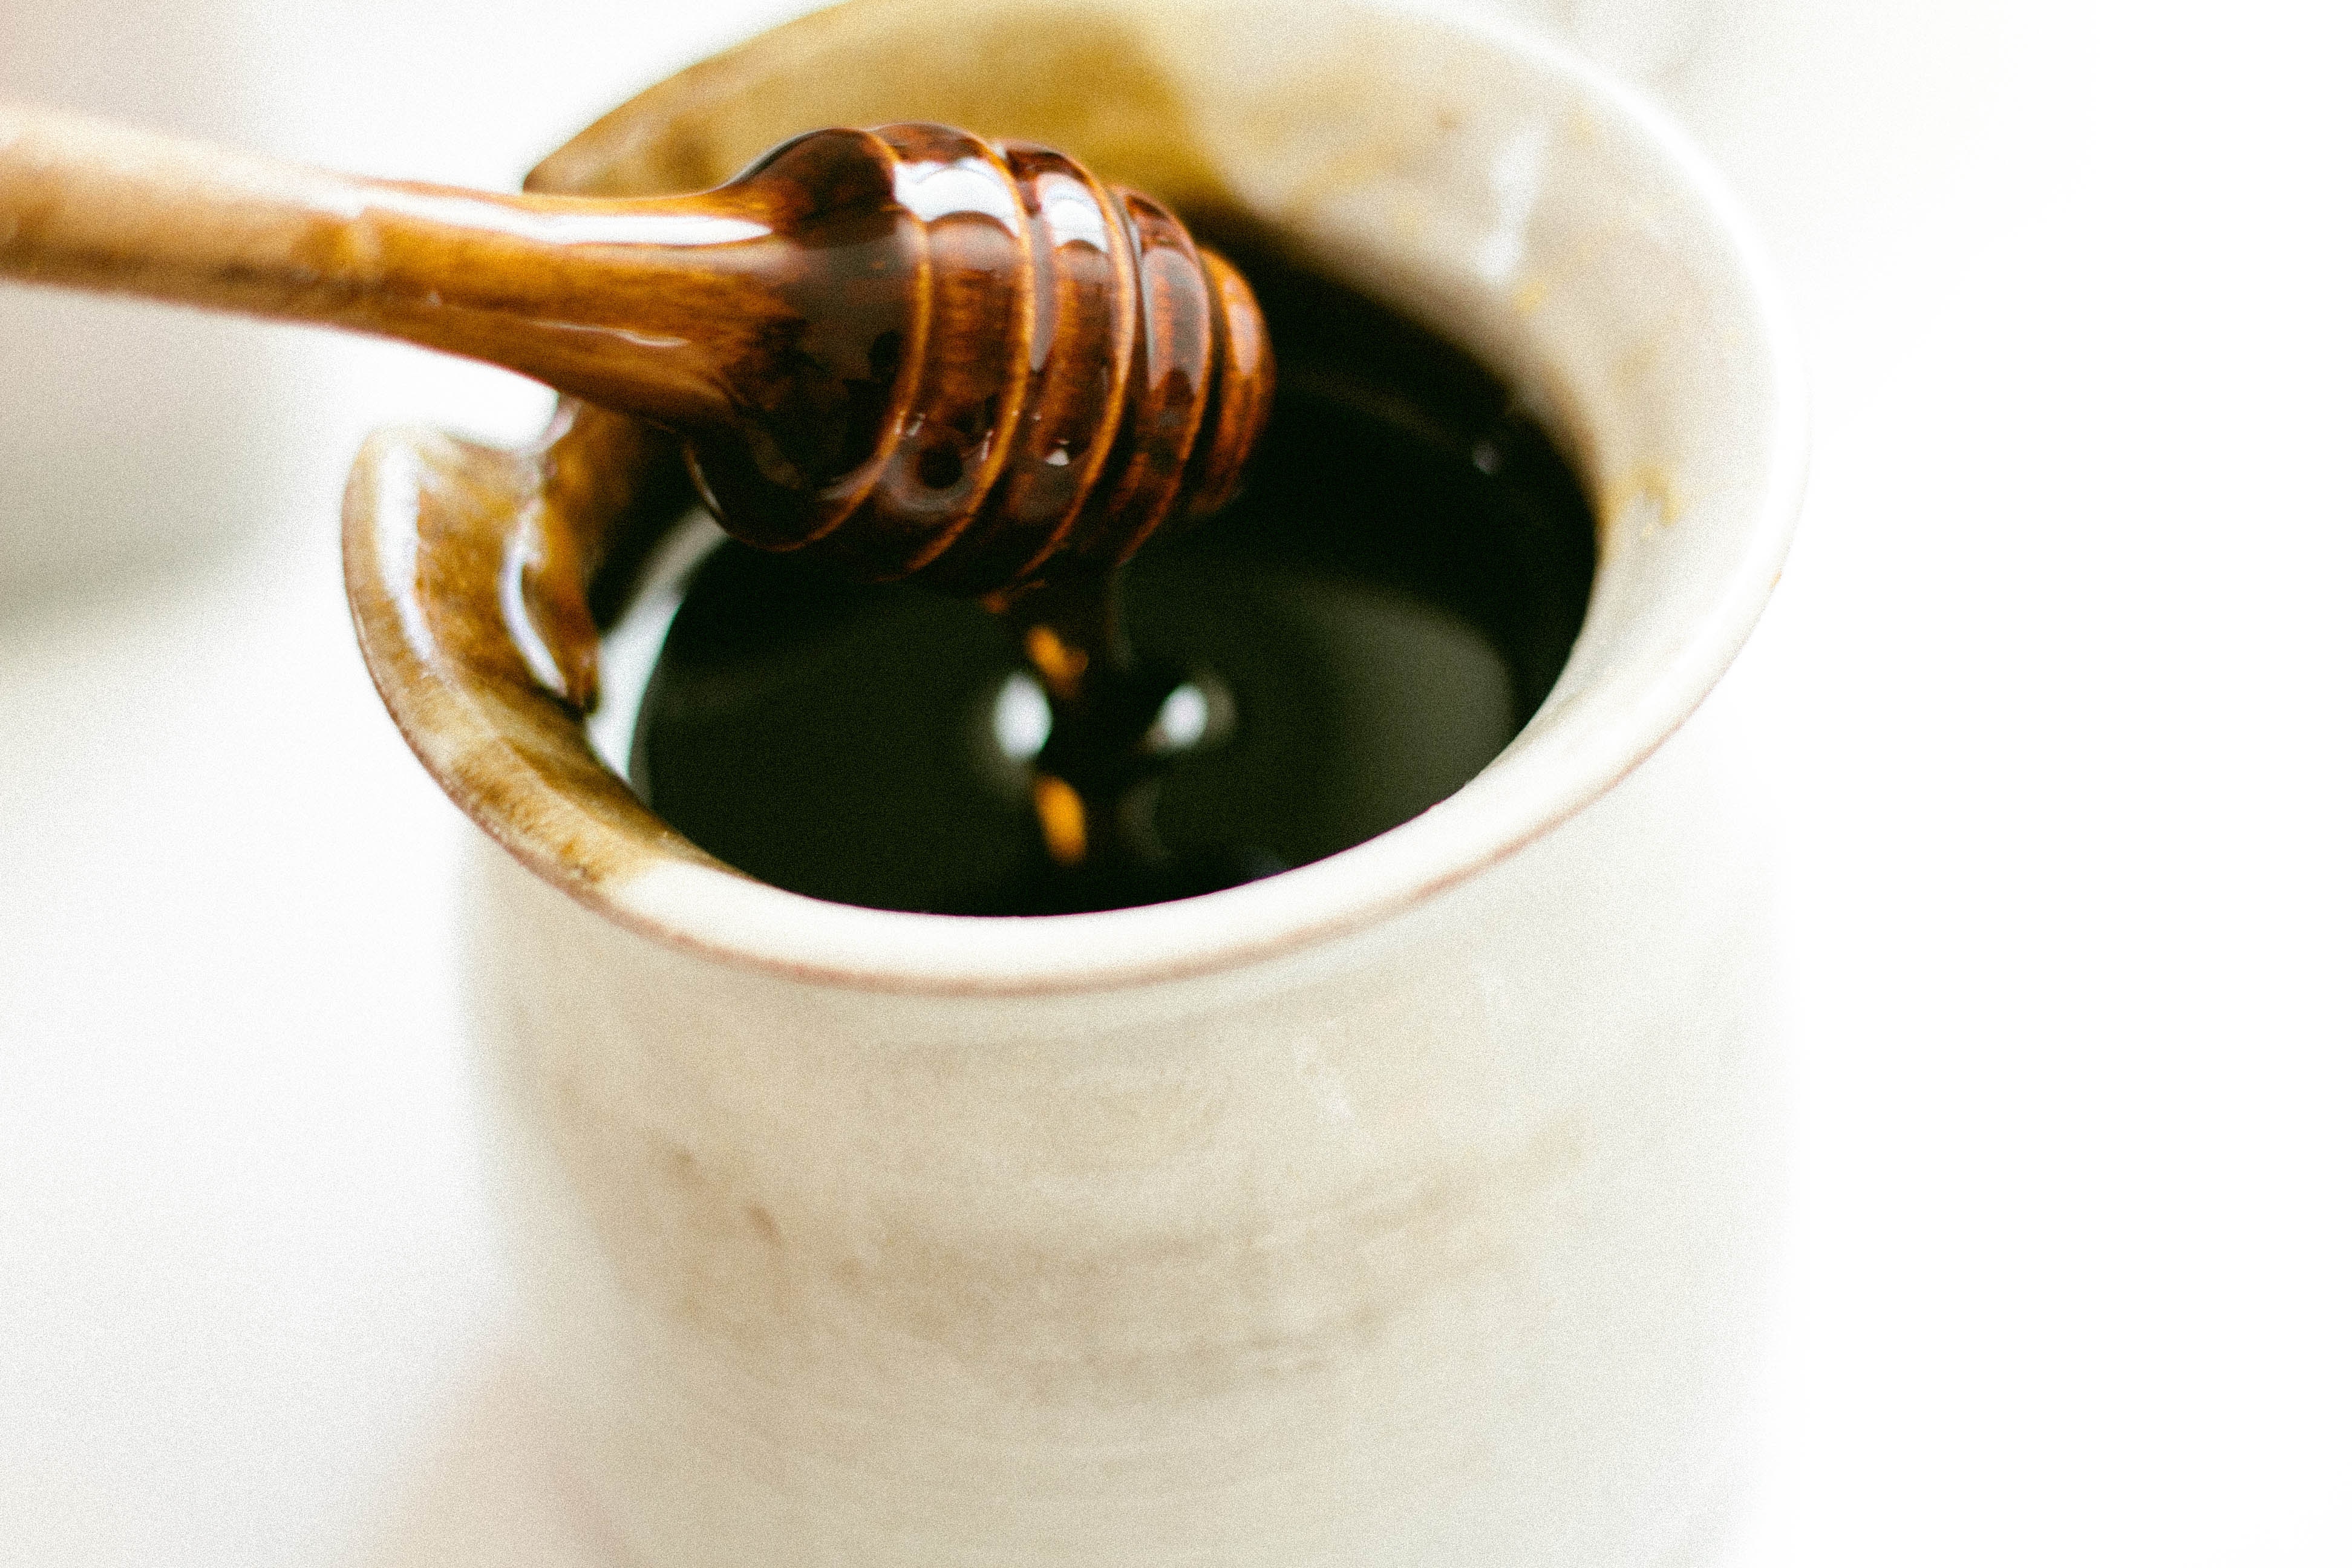 ENTITY shares 7 DIY face masks. Honey is an easy, all-natural ingredient to include. PHOTO OF HONEY VIA UNSPLASH/@SONJALANGFORD